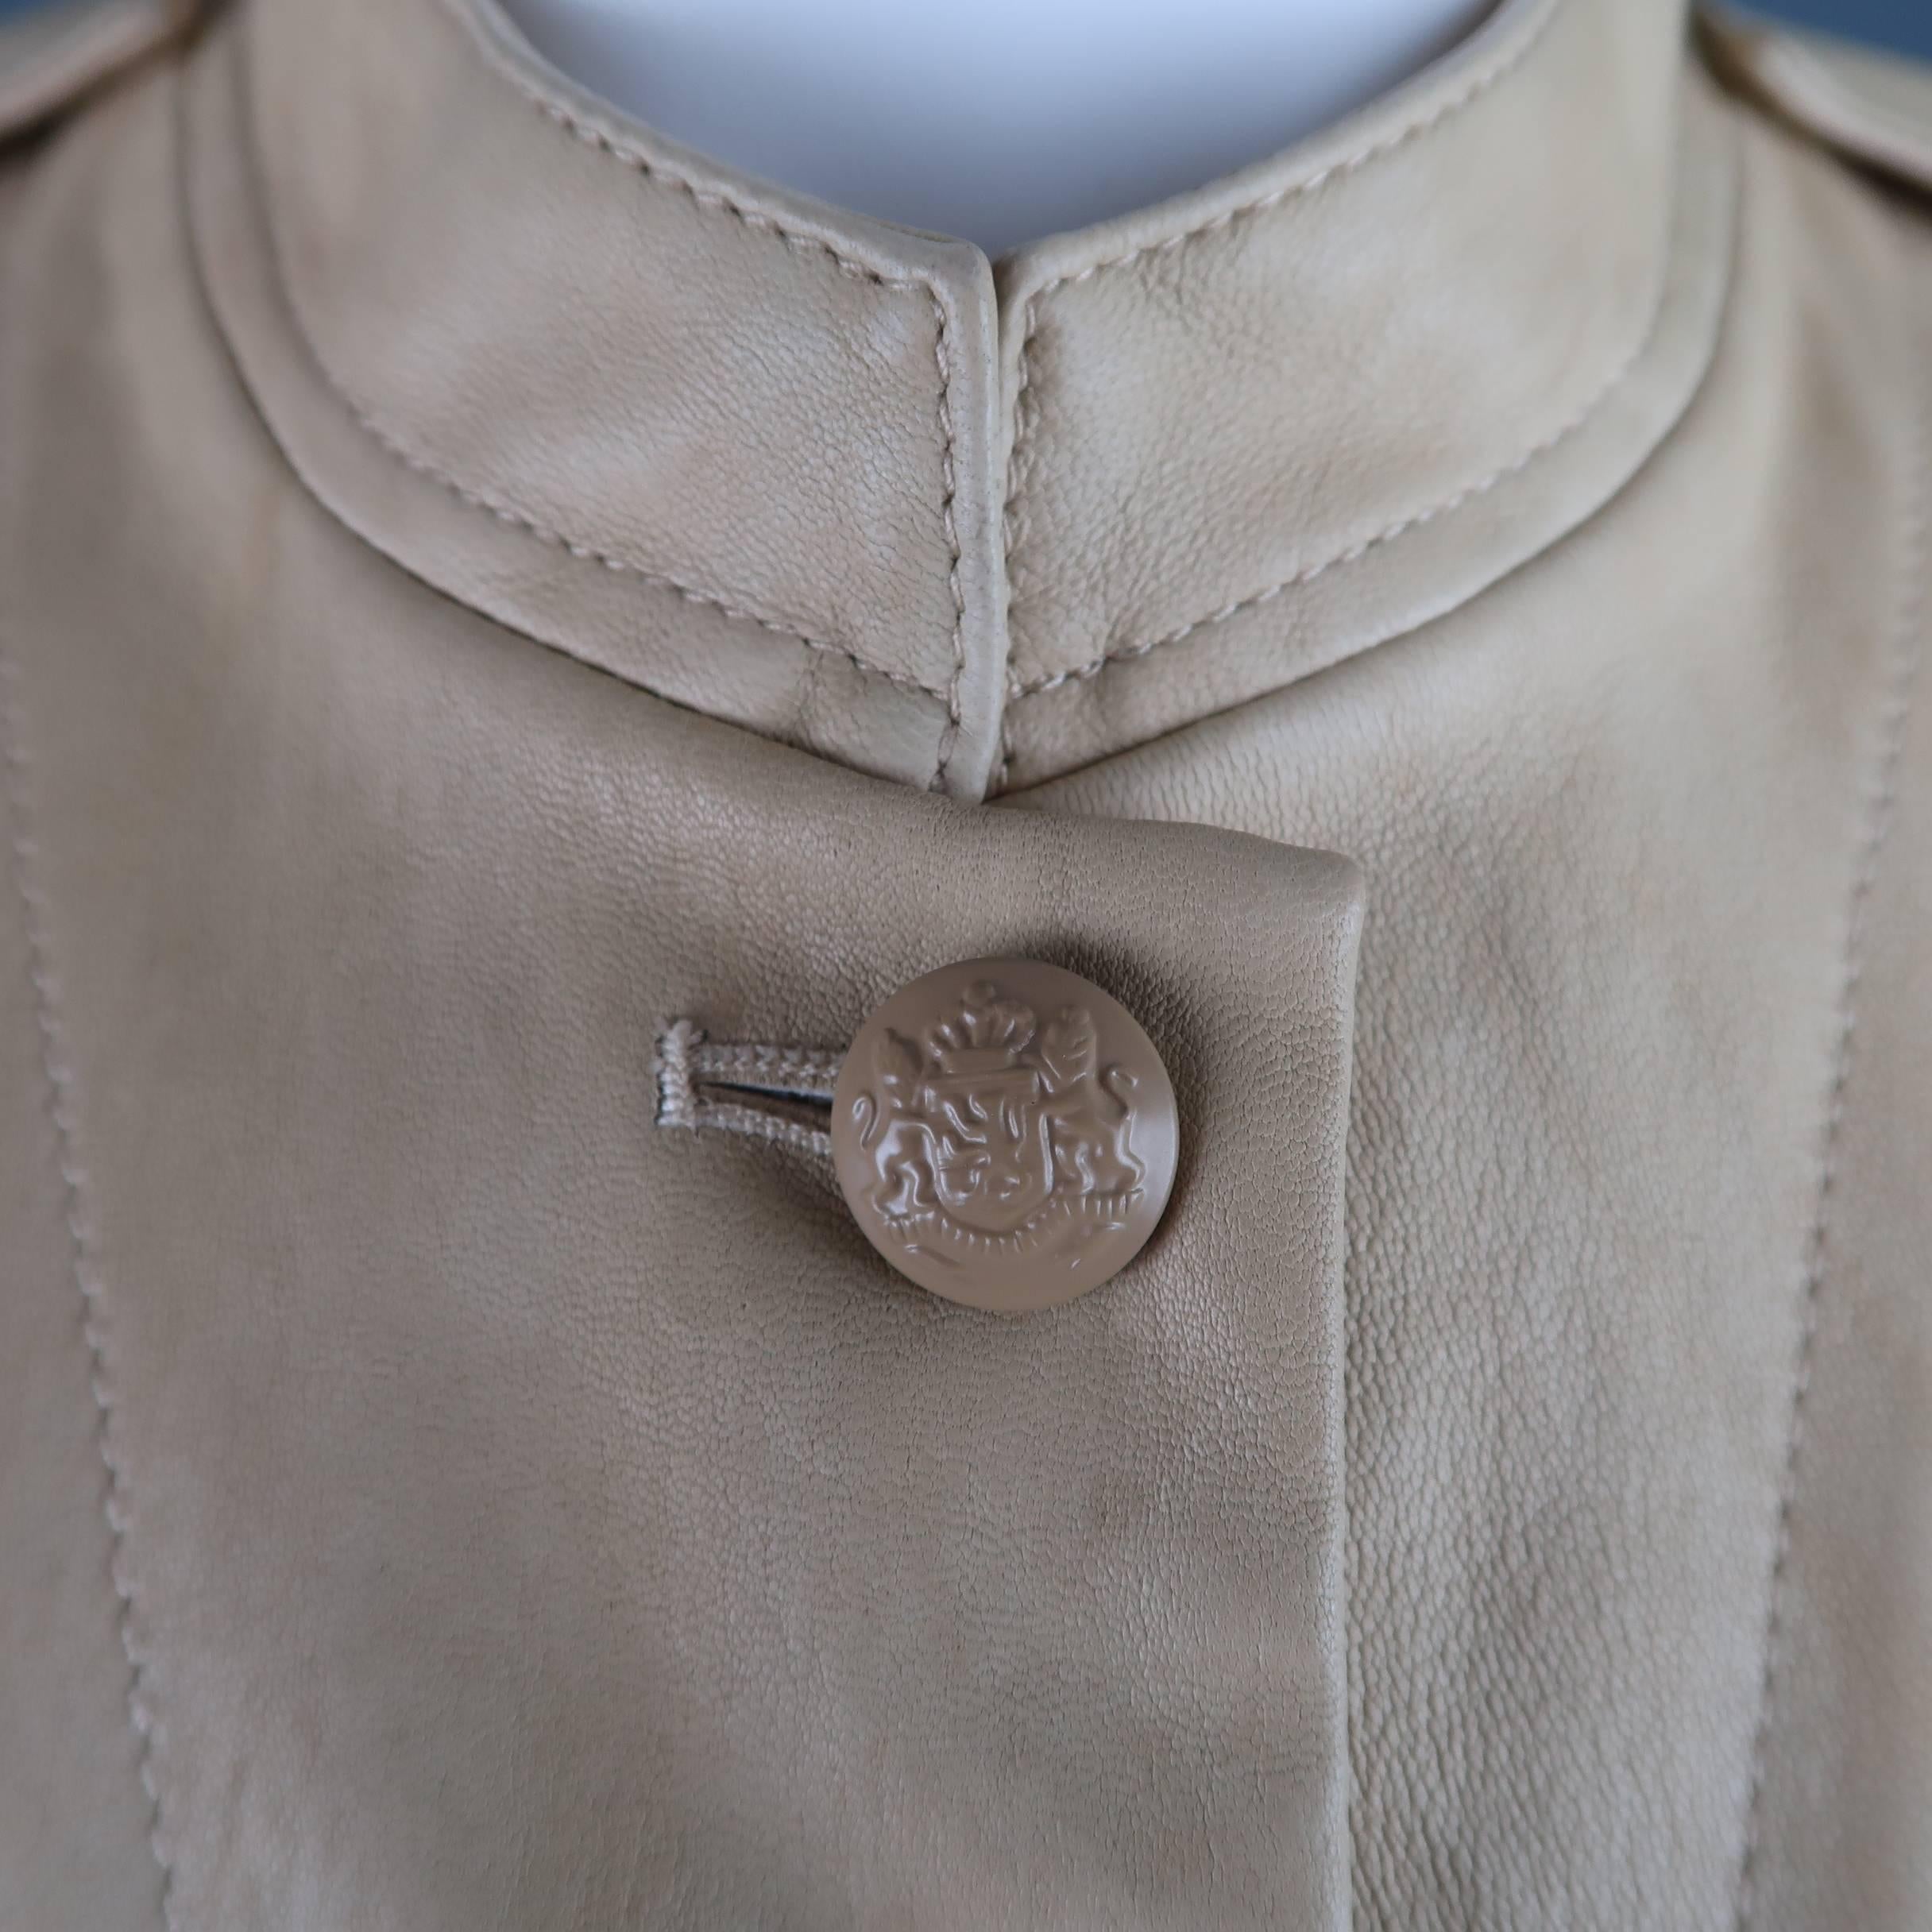 3.1 PHILLIP LIM safari jacket comes in smooth khaki beige leather and features  a band collar, beige coat of arms buttons, epaulets, side zips, and patch flap pockets. Minor wear throughout leather.
 
Good Pre-Owned Condition.
Marked: 8
